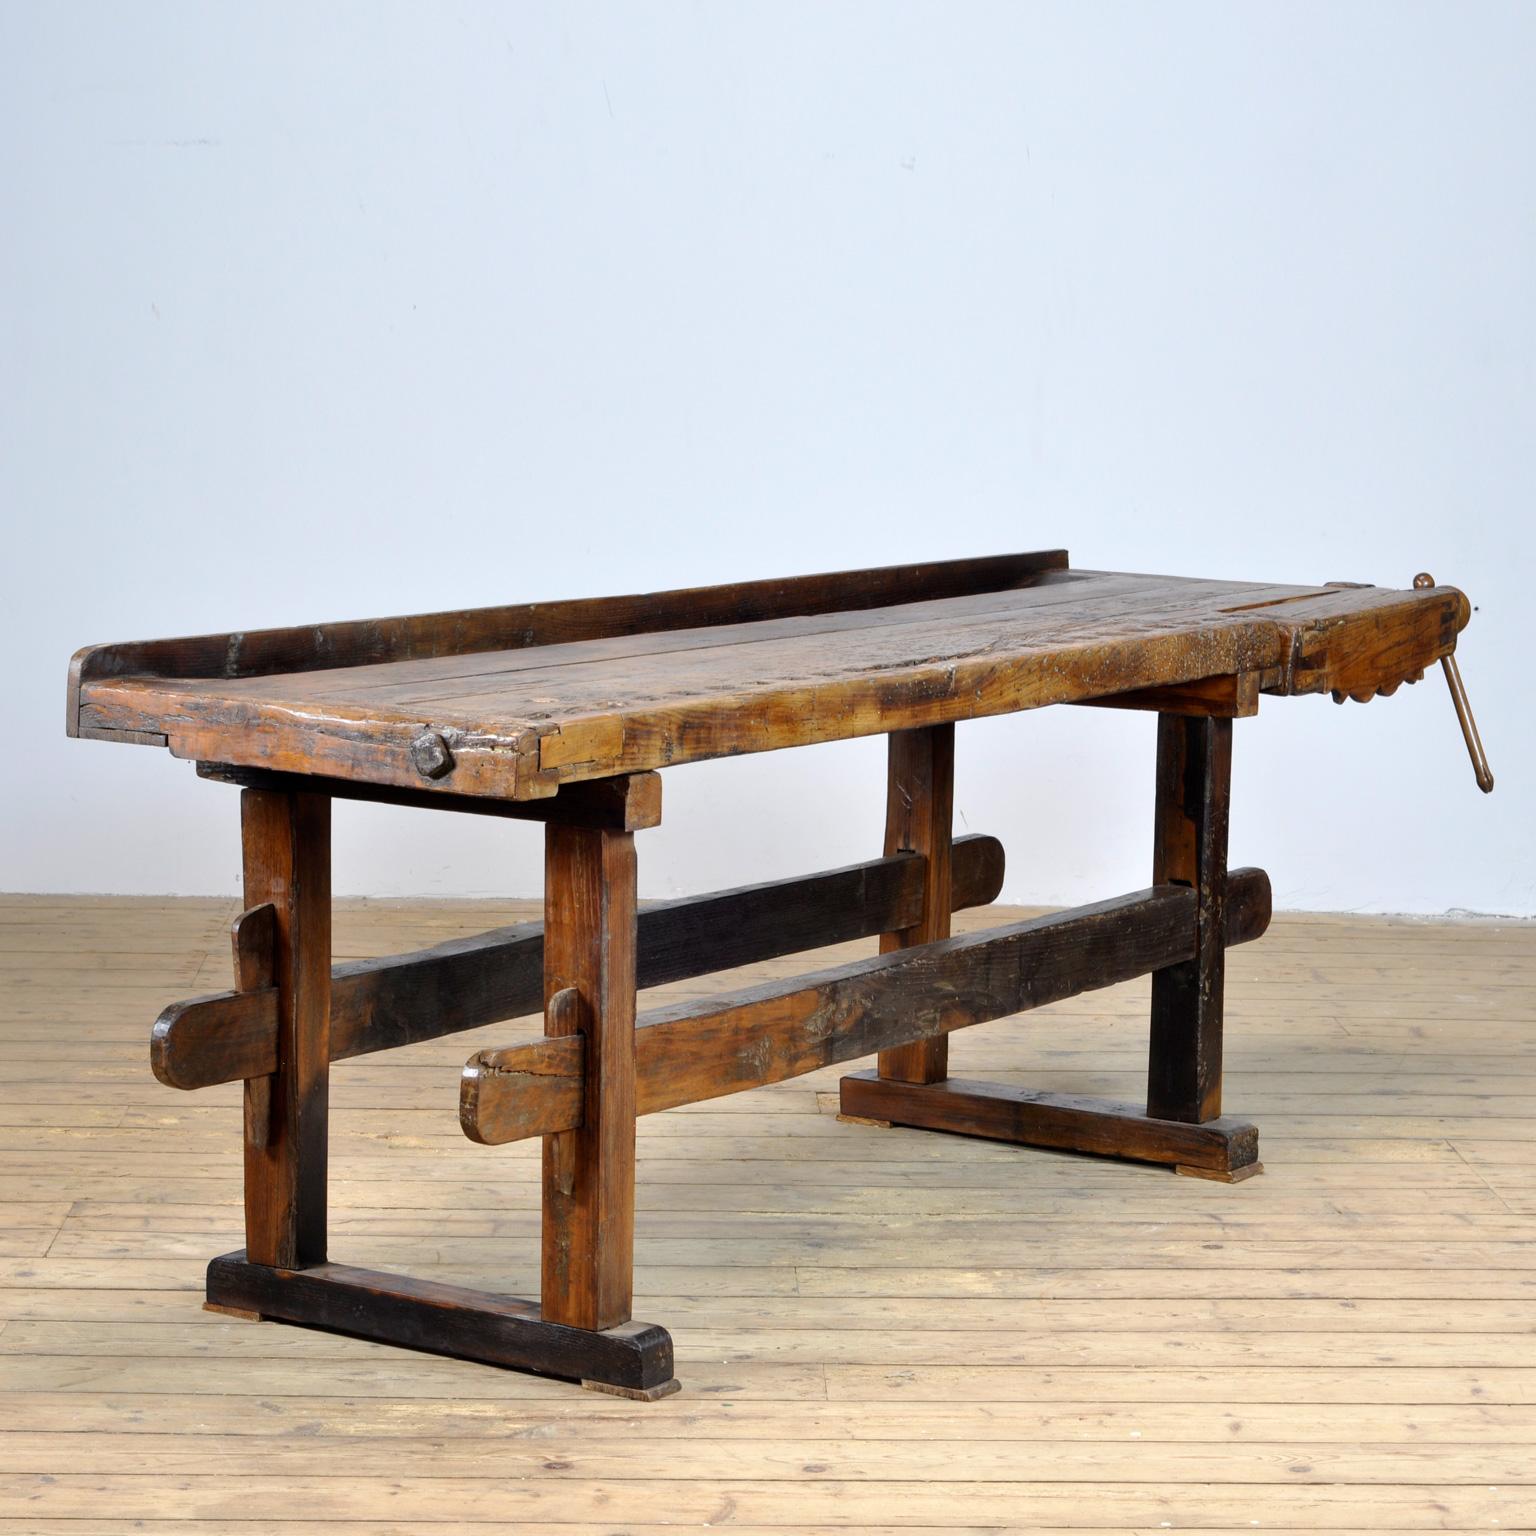 This antique workbench has a built-in wooden vice screw and a recessed tray where the carpenter would put his tools. It was manufactured circa 1900. Made from oak. Beautiful patina after years of intensive use. The workbench has been restored and